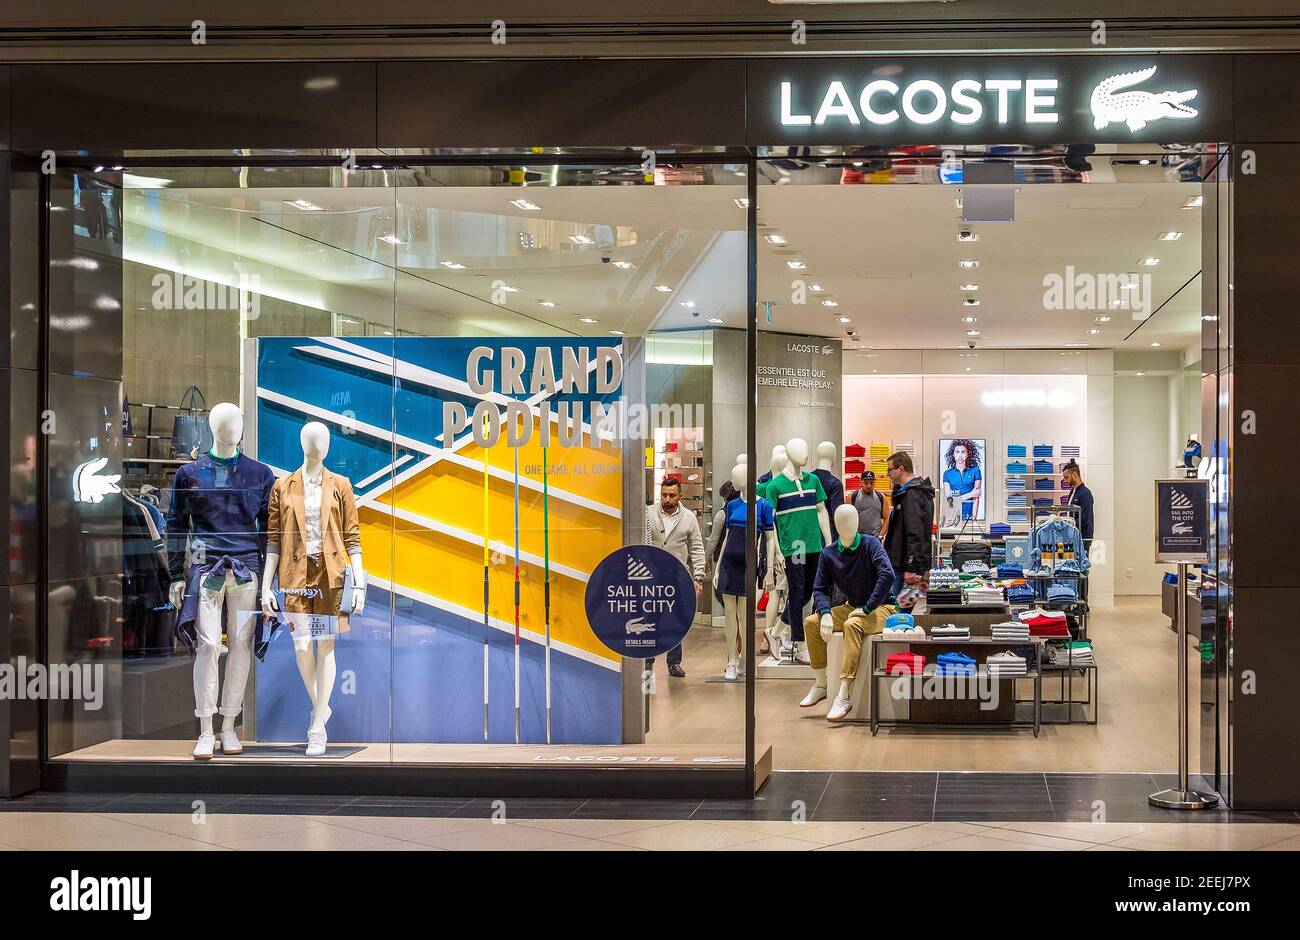 Lacoste Brand High Resolution Stock Photography and Images - Alamy